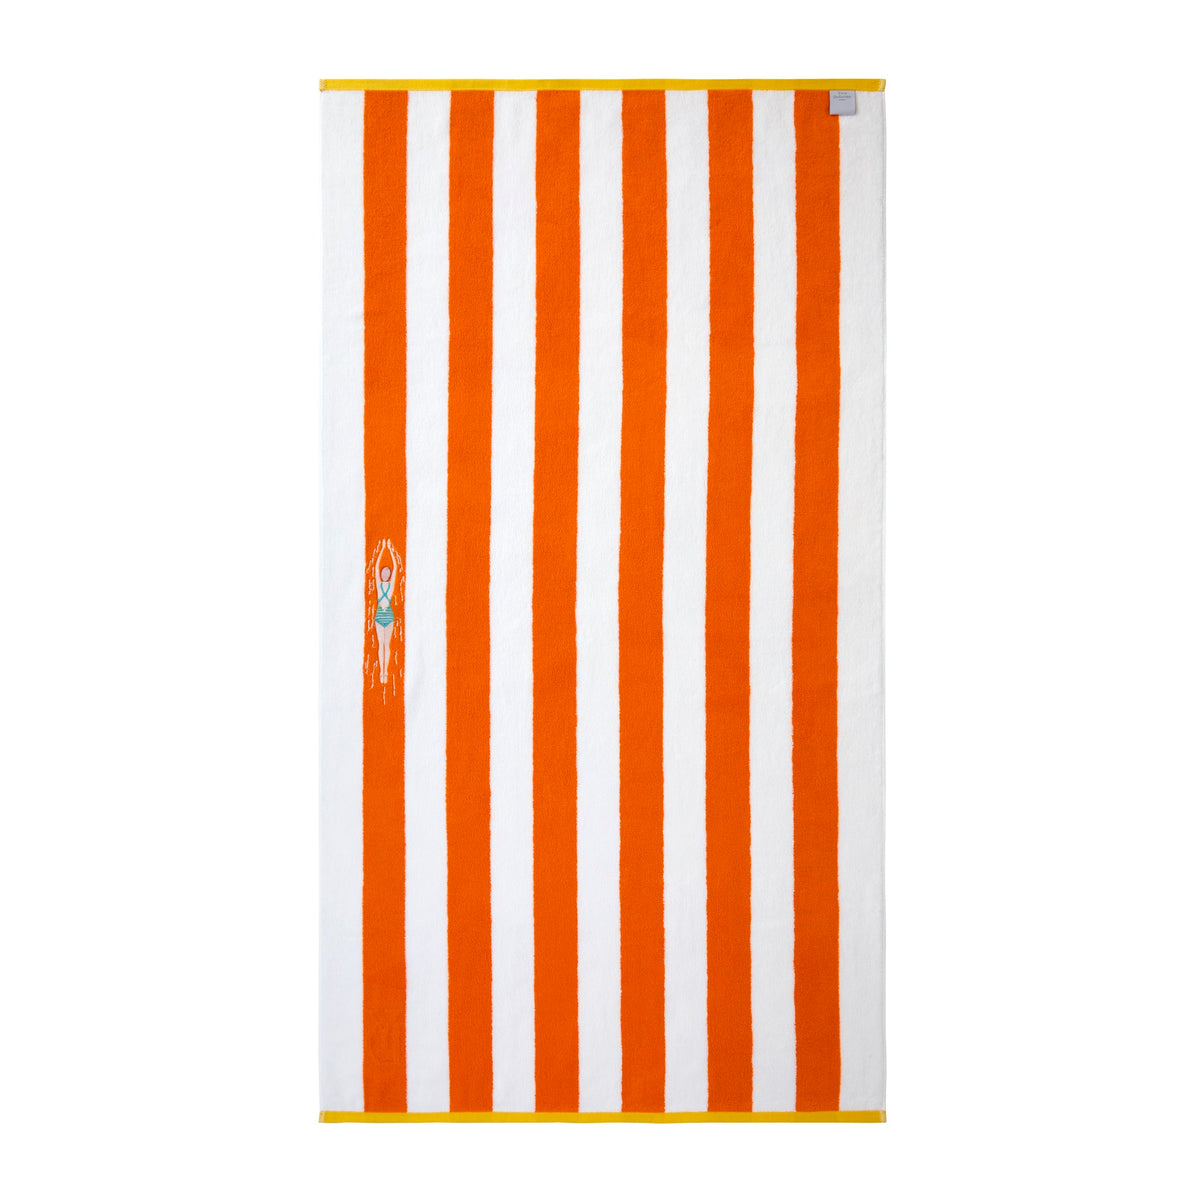 Back View of Yves Delorme Nageuse Beach Towel